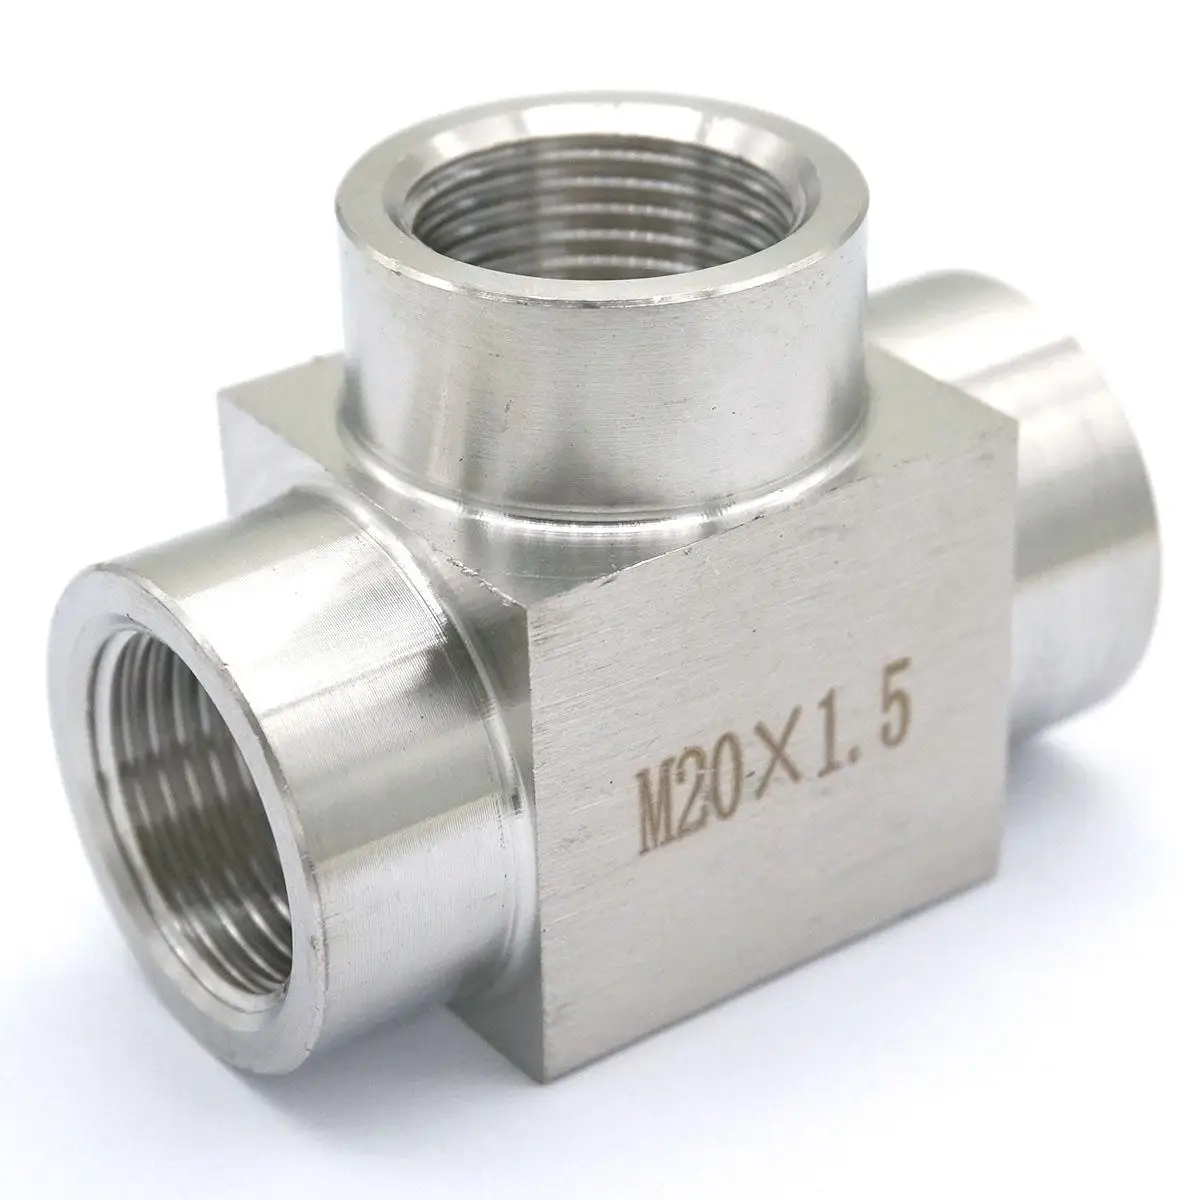 1/2" Tee 3 way Female Stainless Steel 304 Threaded Pipe Fitting NPT Hot 